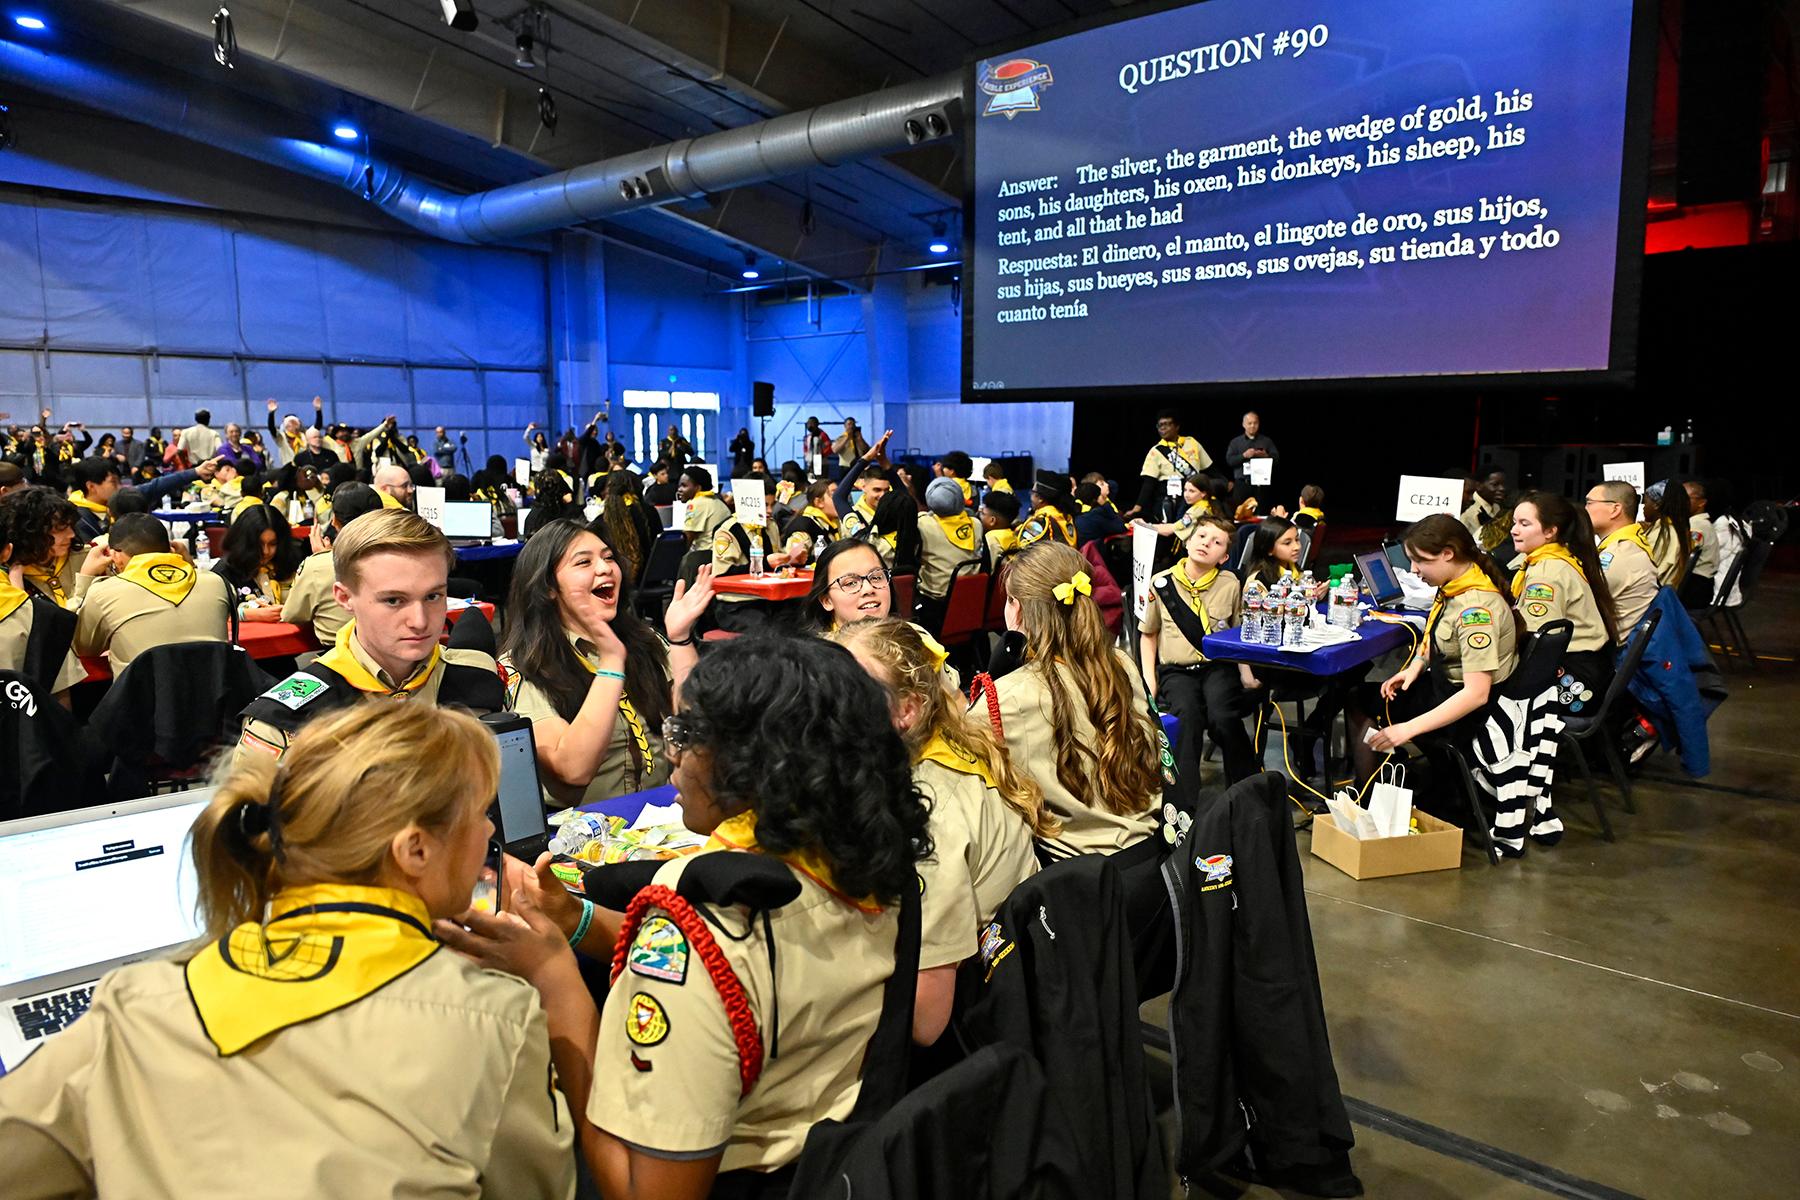 A big screen reading 90, with a question and answer is in the background. Pathfinders at tables are in the foreground. 